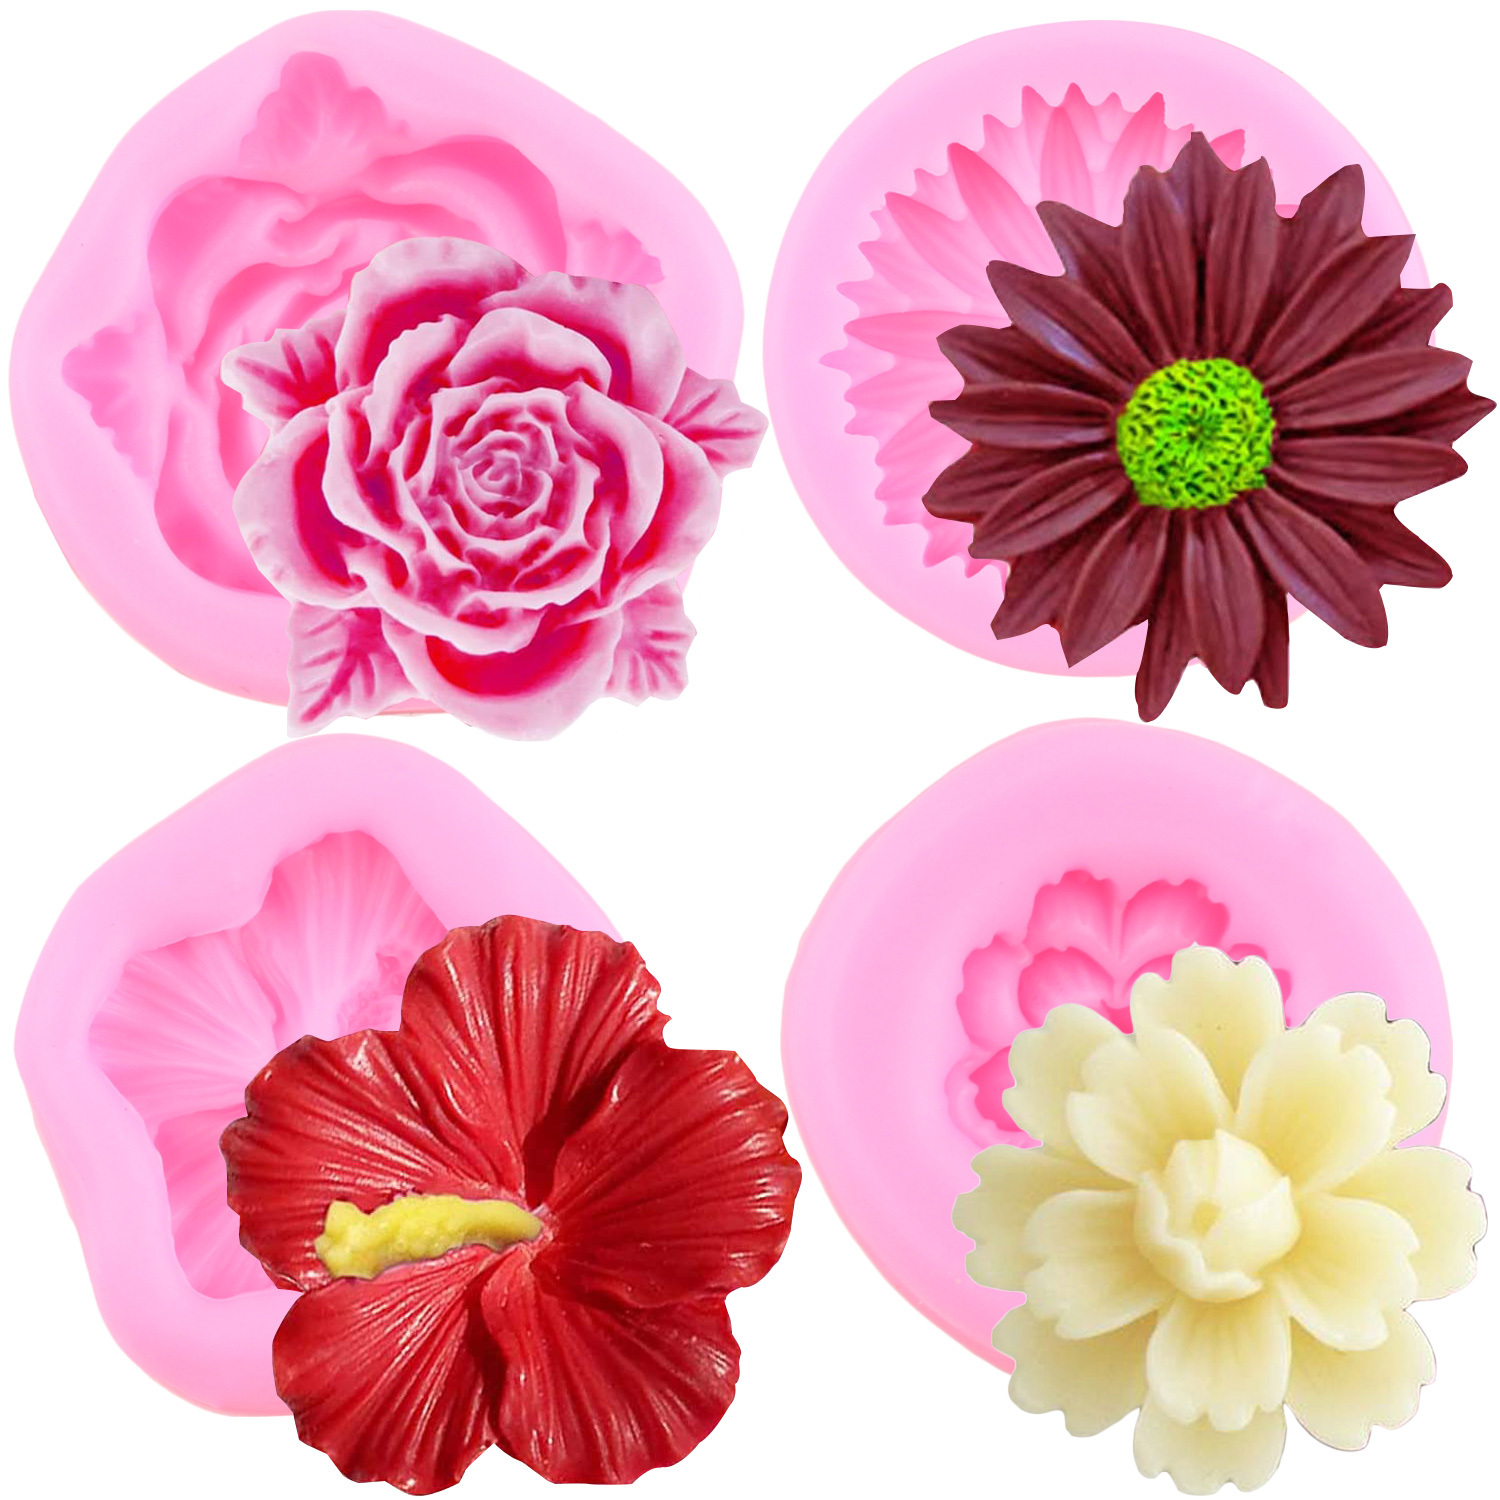 Large Three-dimensional Rose Flower Silicone Mold, Cake Fondant Decoration  Mold, DIY Chocolate Bakeware Resin Mold